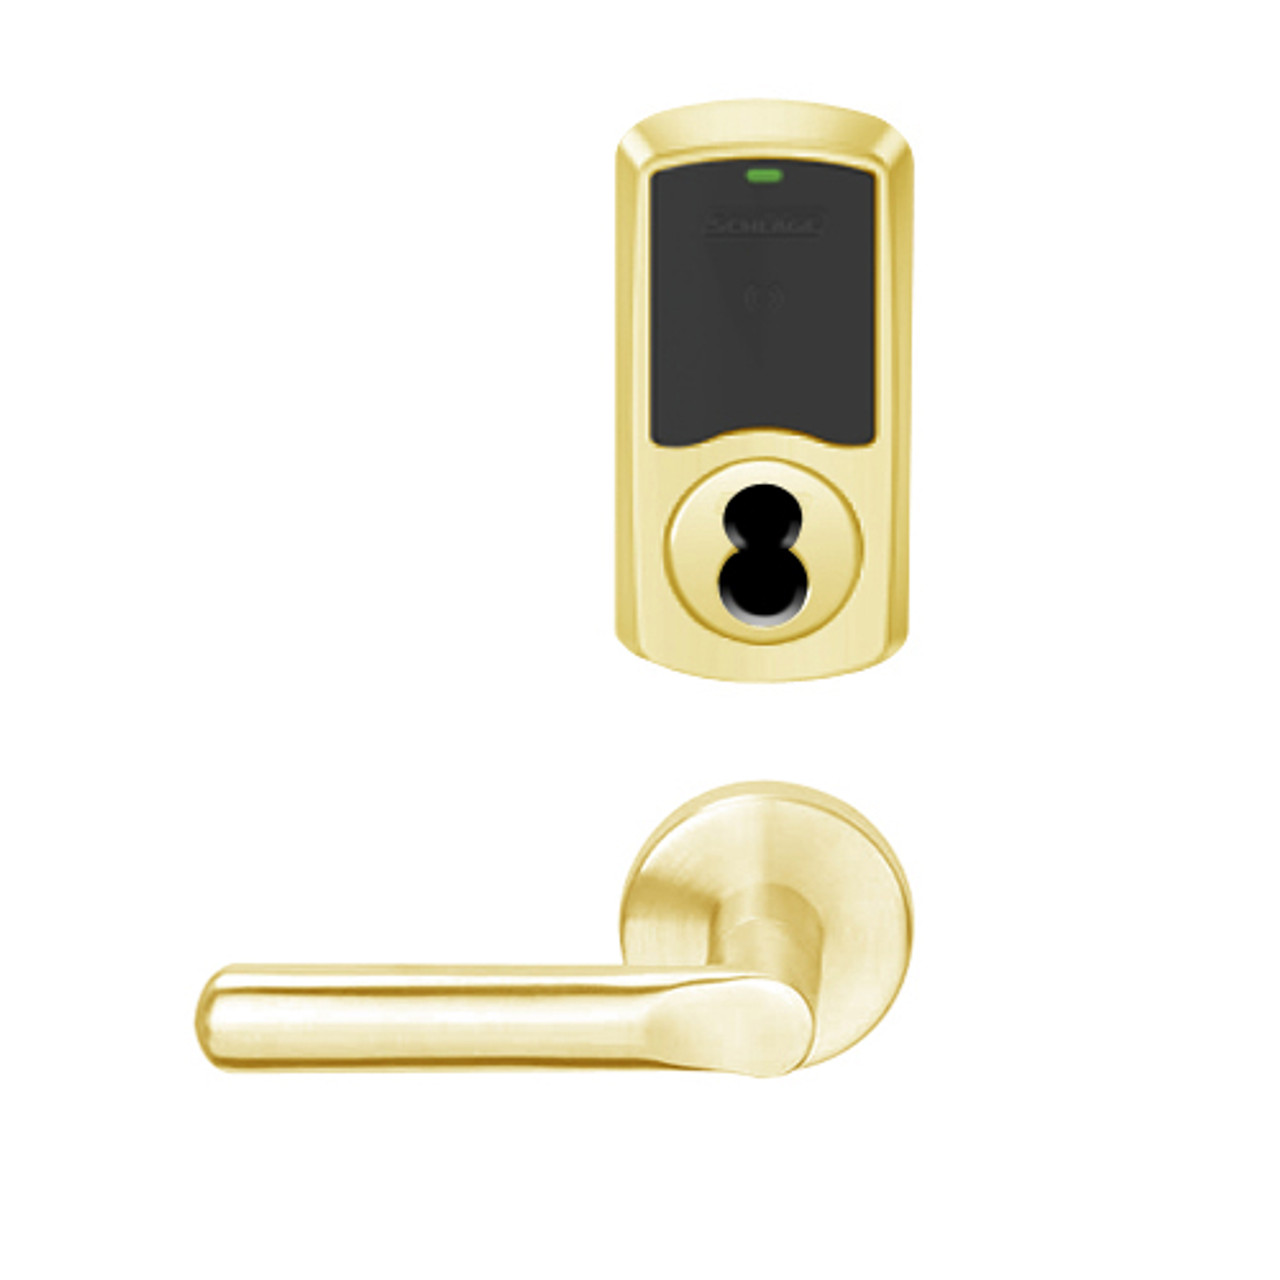 LEMS-GRW-J-18-605-00C Schlage Storeroom Wireless Greenwich Mortise Lock with LED Indicator and 18 Lever Prepped for FSIC in Bright Brass